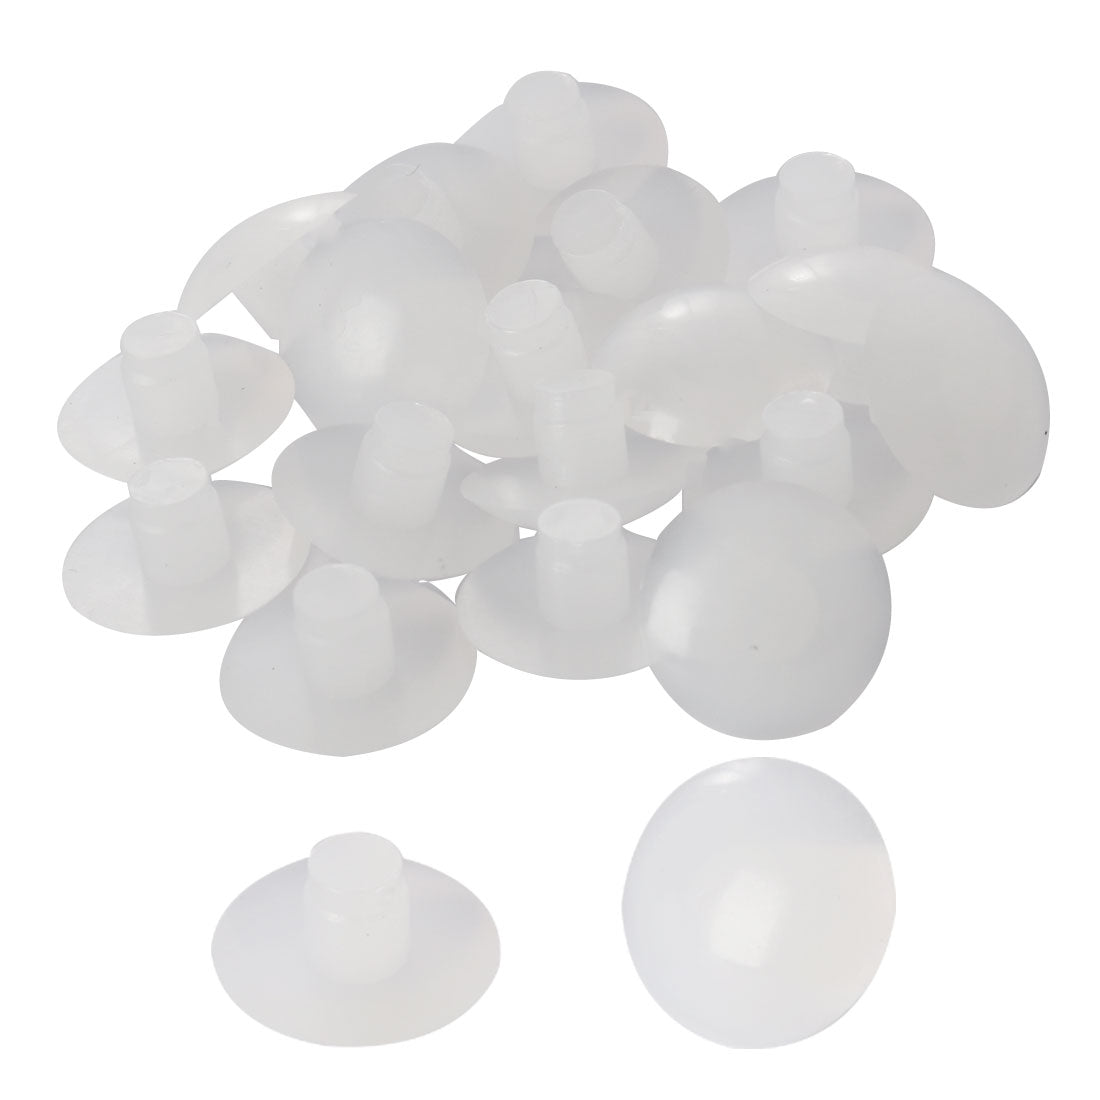 uxcell Uxcell 20pcs 6mm White Stem Bumpers Glide, Patio Outdoor Furniture Glass Table Top Anti-collision Embedded